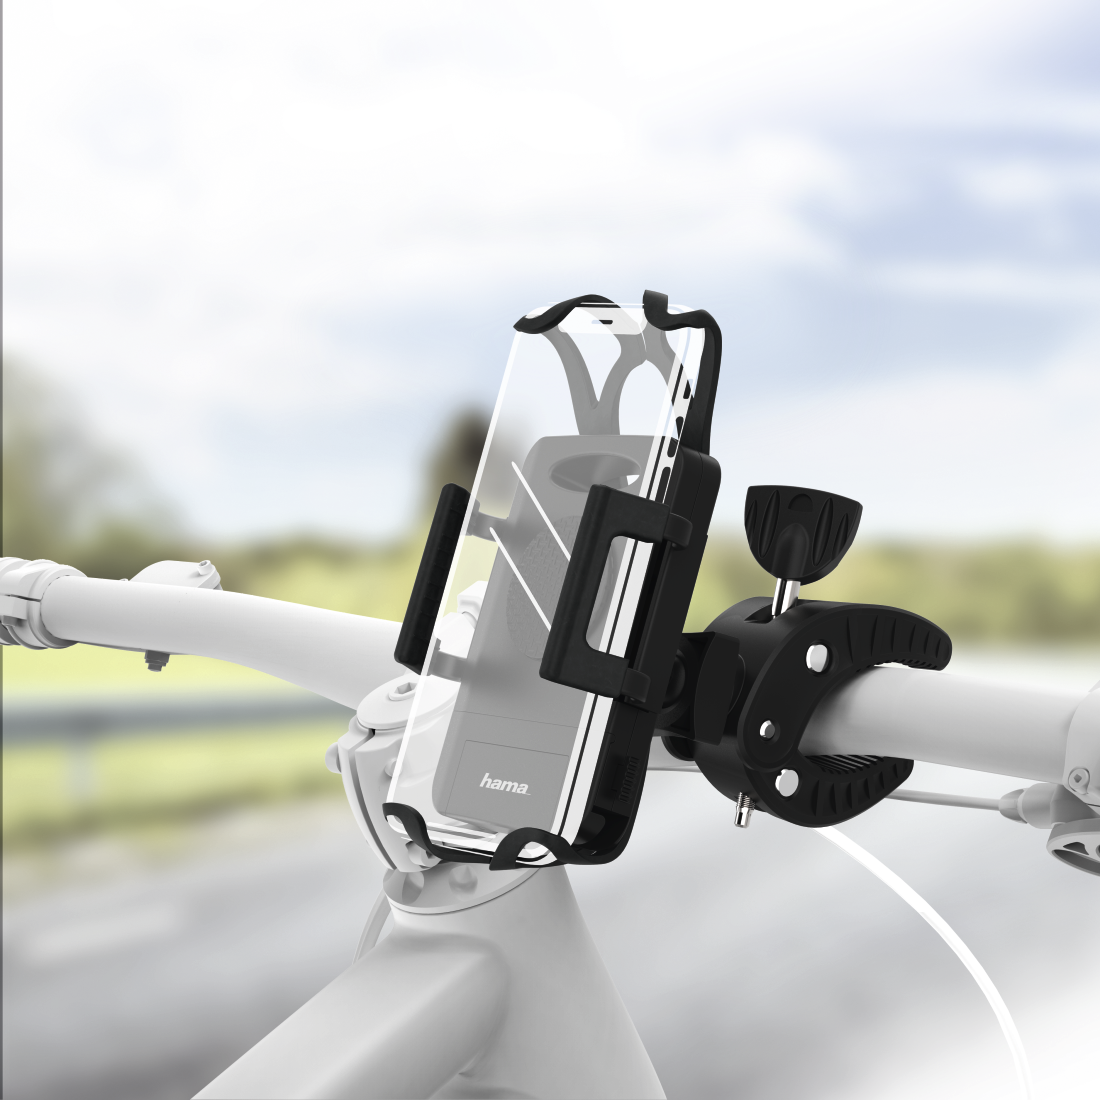 00178251 Hama Universal Smartphone Bike Holder for devices with a width  between 5 to 9 cm